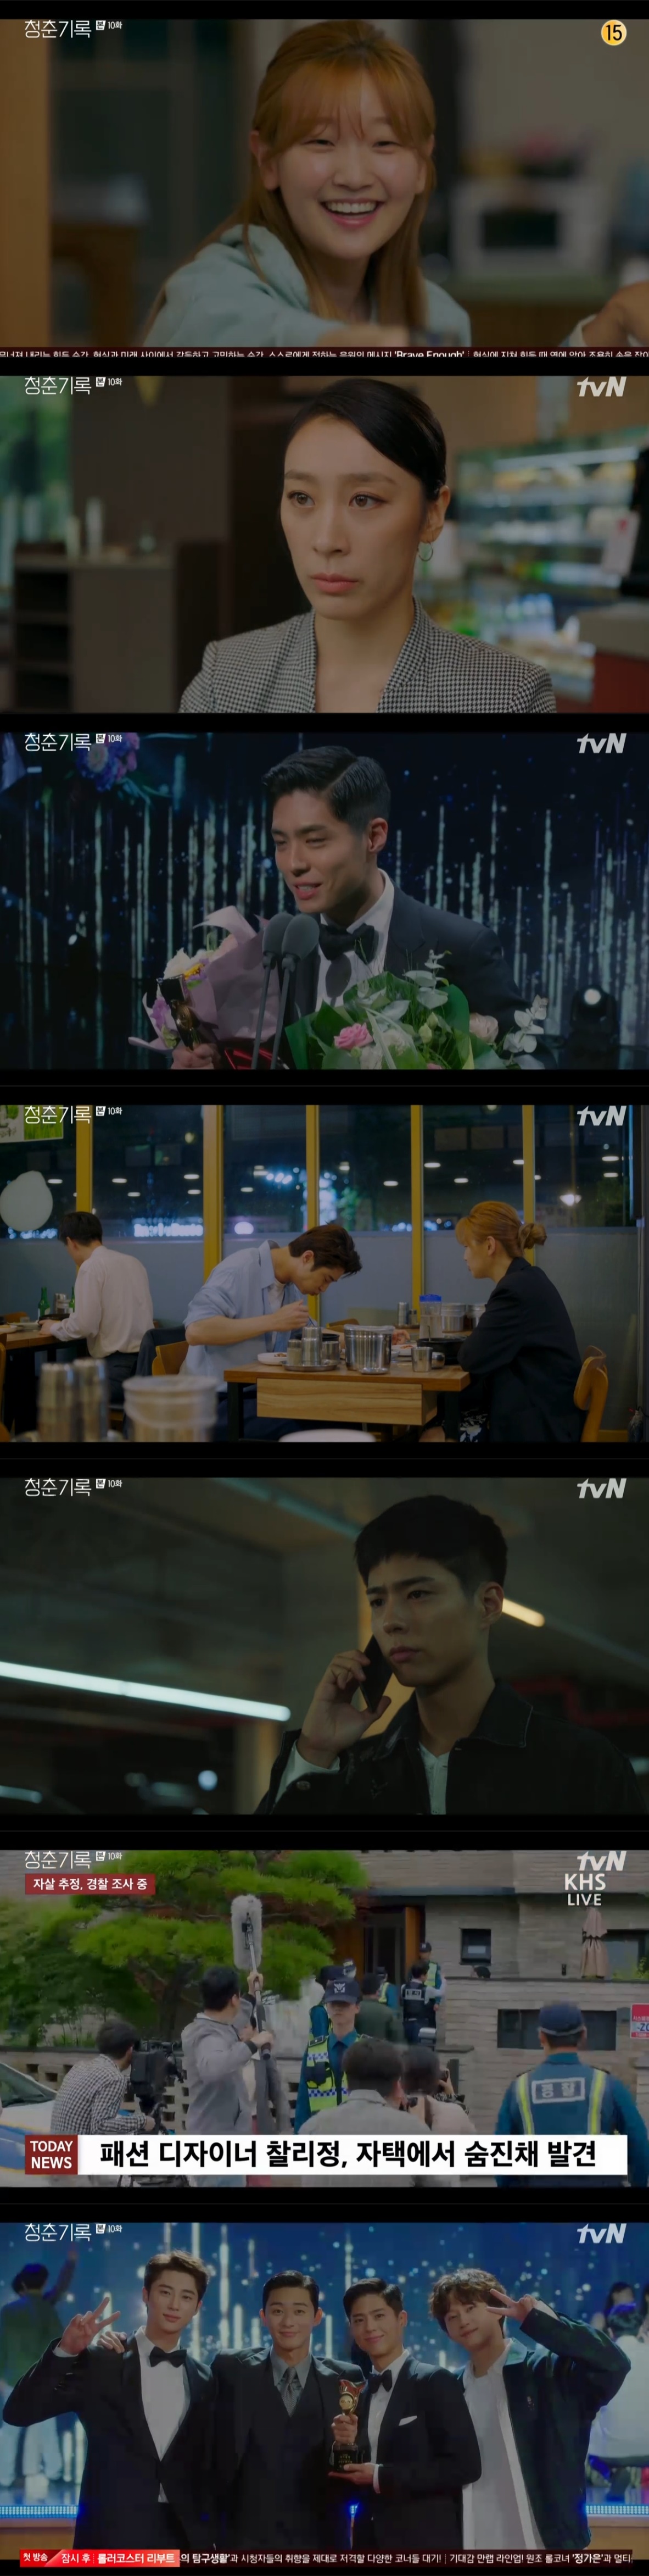 In the TVN drama Record of Youth broadcast on the 6th, Sa Hye-joon (Park Bo-gum), who is winning the victory as an actor, was portrayed as Danger due to the death of Lee Seung-jun.On this day, Jeong Ha (Park So-dam) had breakfast with Father (Son Chang-min), and was handed a bankbook; Father said, Its money I collected for my marriage; Father draws again.I will live hard to show you to Father.  I want to be remembered as a person who ruined your childhood but lived hard and hard. With the help of his father, he decided to run a one-person shop, and he resigned and received an apology directly from his shooter Jinju (Geo Ji-seung).Hye-joons ex-girlfriend Jia (Sul In-ah) called Hye-joon, but Hye-joon said, Its the past. So Jia bought snacks and found the shooting scene, but Hye-joon treated them coldly.Jias proposal to stay as a friend showed a firm appearance saying, I can not be friends with you.On the other hand, Hae Hyo (Byeon Woo-seok) was struggling when people around her, including her mother Lee Young (Shin Ae-ra), compared her and Hye-joon, and asked Jeong-ha to have dinner together, but she was rejected.Hye-joon, who has a lot of people to recognize, promised to date at Jung-has house.Min Jae (Shin Dong-mi) asked Hye-joon, Do not hug outside and take such a picture, it will be difficult. Hye-joon said, I will be careful.If you write, it will be harder for you to get to Jungha. But the paparazzi took a picture of Hyejun entering Junghas house, which made him nervous.Hye-joon, who came up after the local filming, made a dish directly at the house of Jeongha and waited for Jeongha, and the two enjoyed dating while having dinner together.When Jeongha asked, How do you feel these days? Hyejun said, I am anxious. I search my name several times a day. Jeongha said, I am anxious.Sa Hye-joon is anxious because he is well, but I am anxious that I will be ruined. There is also anxiety.Hye-joon responded positively, I will think positively of everything that happens now.In the meantime, Hyejun was nominated for Grand Prize after MC for Acting Grand Prize.He greeted his senior Minsu (Park Seo-joon) who came to the award ceremony and Minjae laughed as he showed his fanship toward Minsu.On this day, Hyejun won the Grand Prize over Haehyo and Doha. Hyejun said, Until a year ago, I was an unnamed actor and an alba student.I am grateful to my grandfather for supporting me at that time. I love my mother. After the awards ceremony, Hye-joon went to dinner with his family and found Jeong-ha. At that time, he met Hae-hyo, who was disappointed in the award, and went to dinner with him.Haehyo vomited all the stress. He confessed to Jung-ha, I wanted to ride a rookie too much. I hate being compared to Hye-joon.At the end of the broadcast, Hye-joon, who became more popular with the Grand Prize Awards, called from the police station.Charlie Jeong (Lee Seung-jun) committed suicide after seeing the news of Hye Juns awards.Hye-joon was asked to investigate the police as a reference to Charlies death, and he was a Danger.